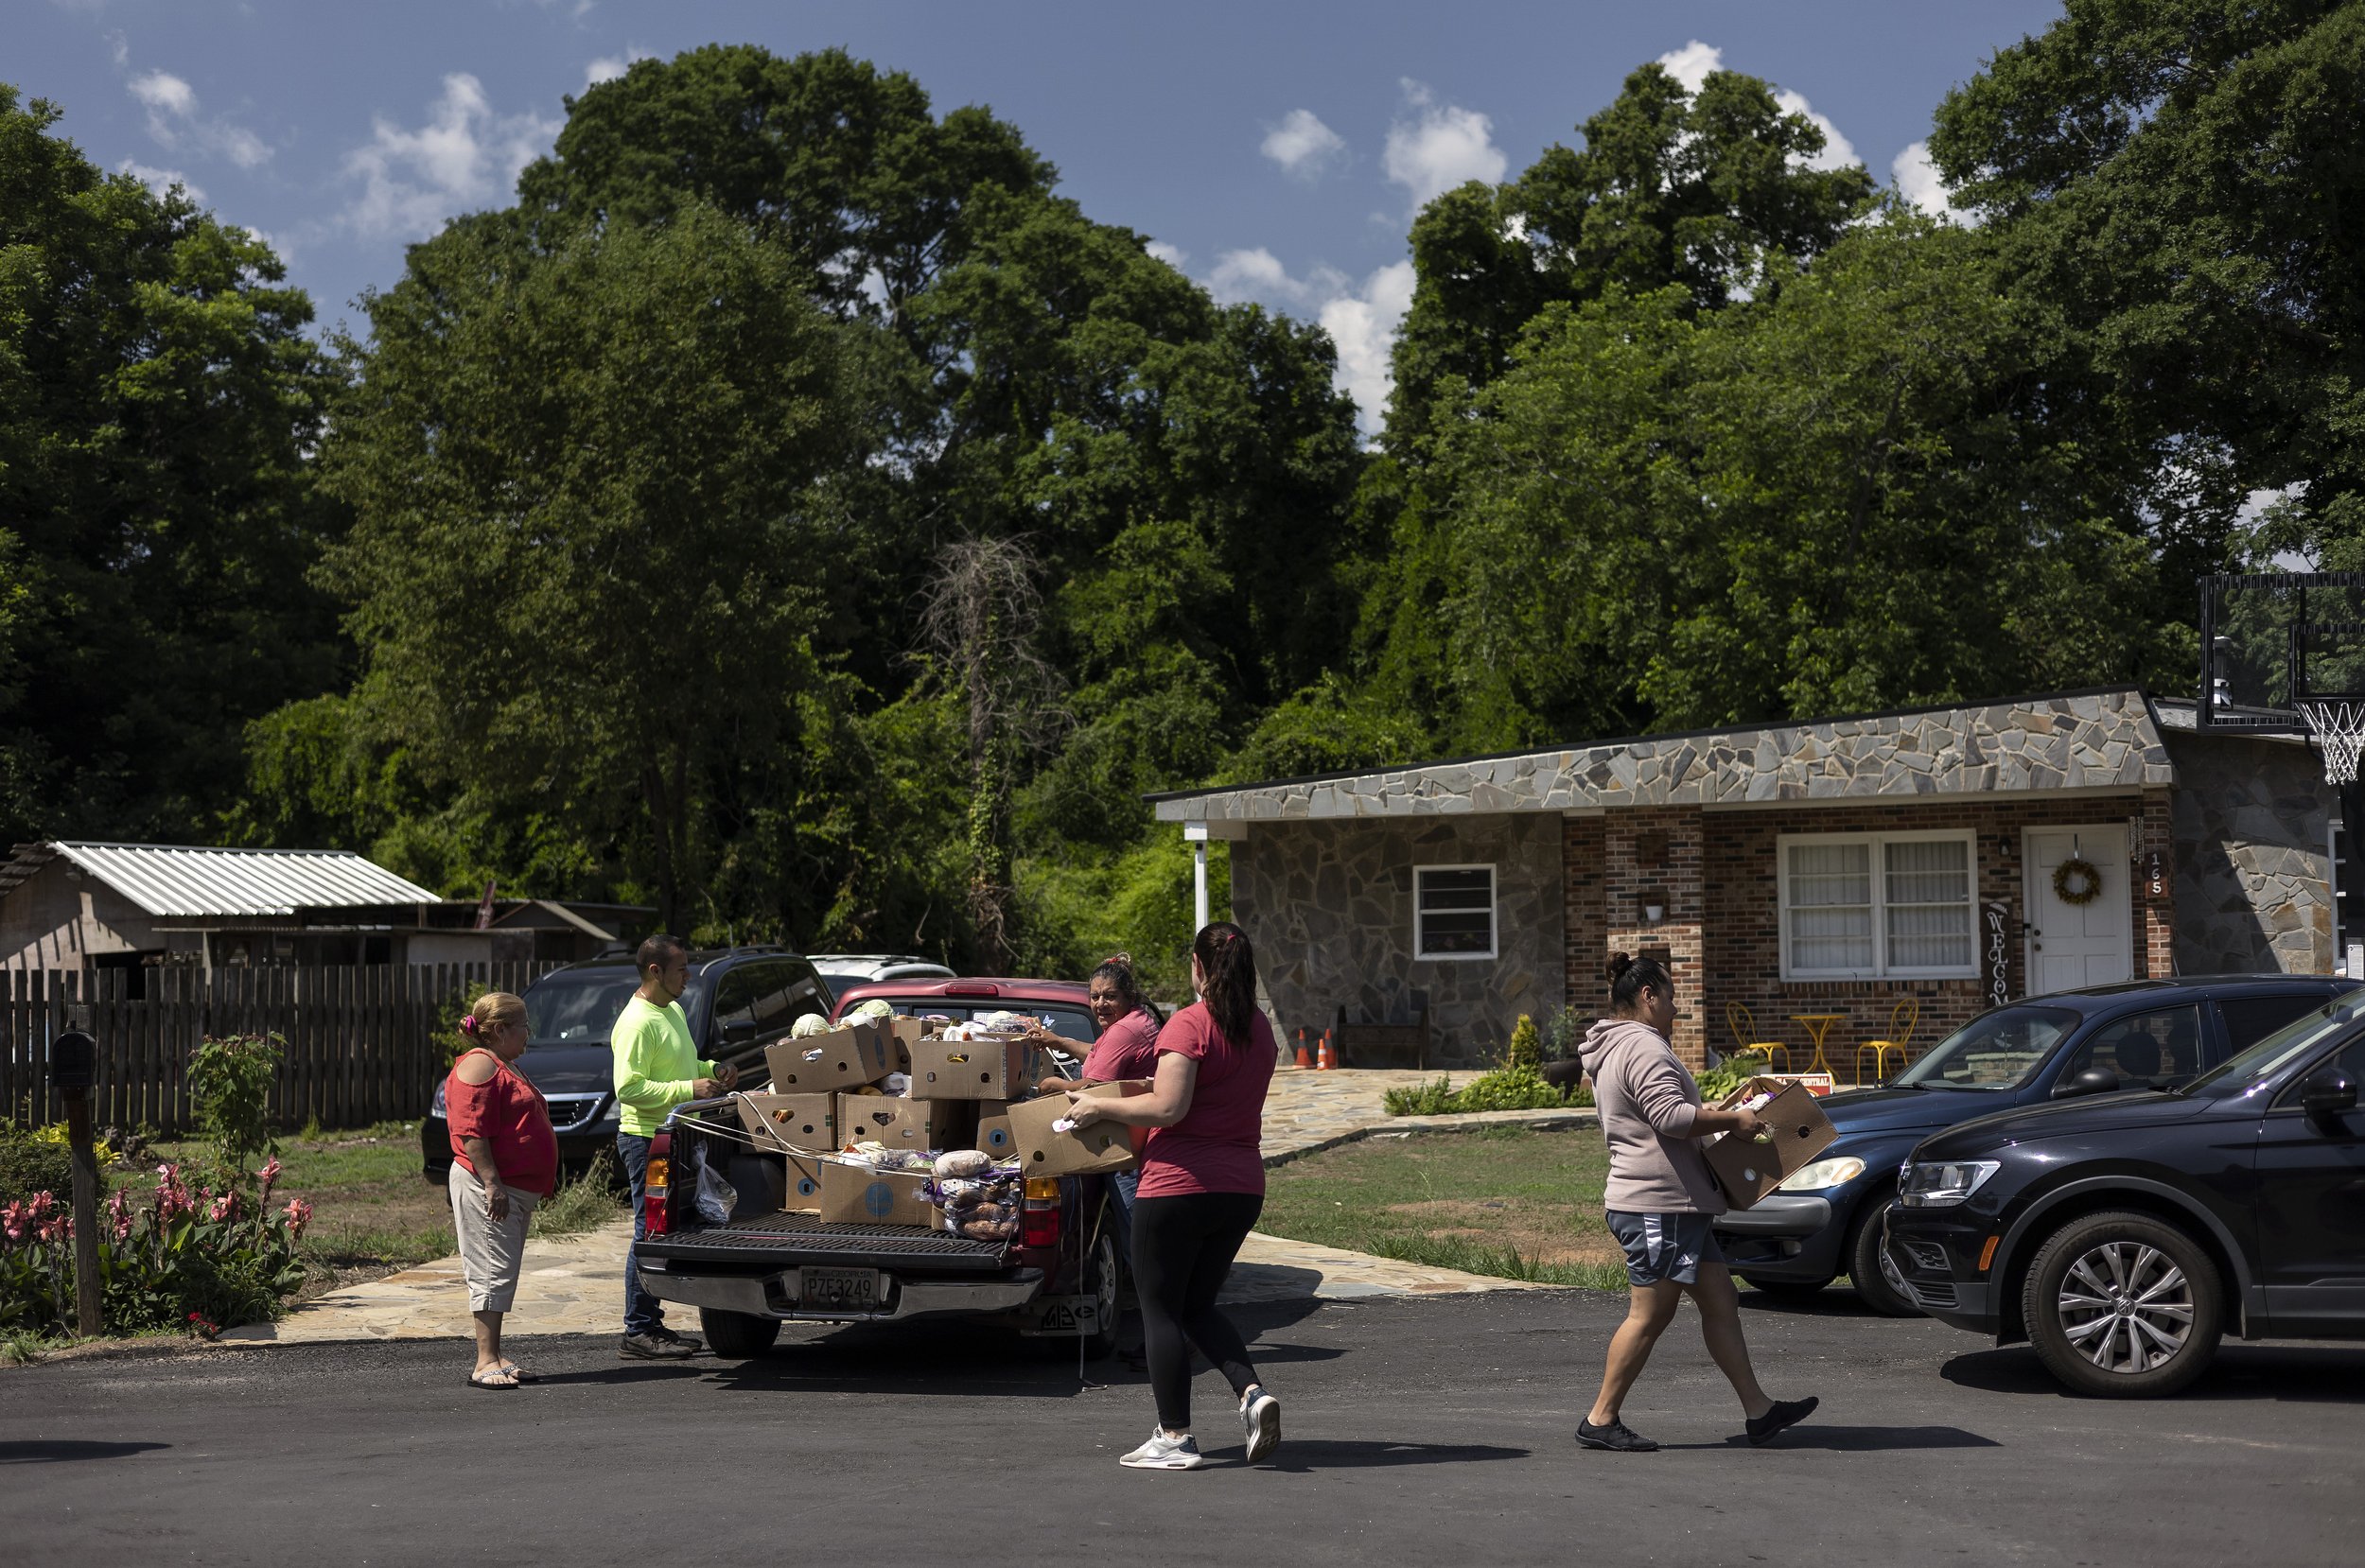  Angel Torres, husband to Esther Carrillo, helps distribute food outside his family’s home on Thursday, June 2, 2022 in Athens. Through their efforts, they help feed more than 30 families on a weekly basis. Many immigrants and people part of the Lati